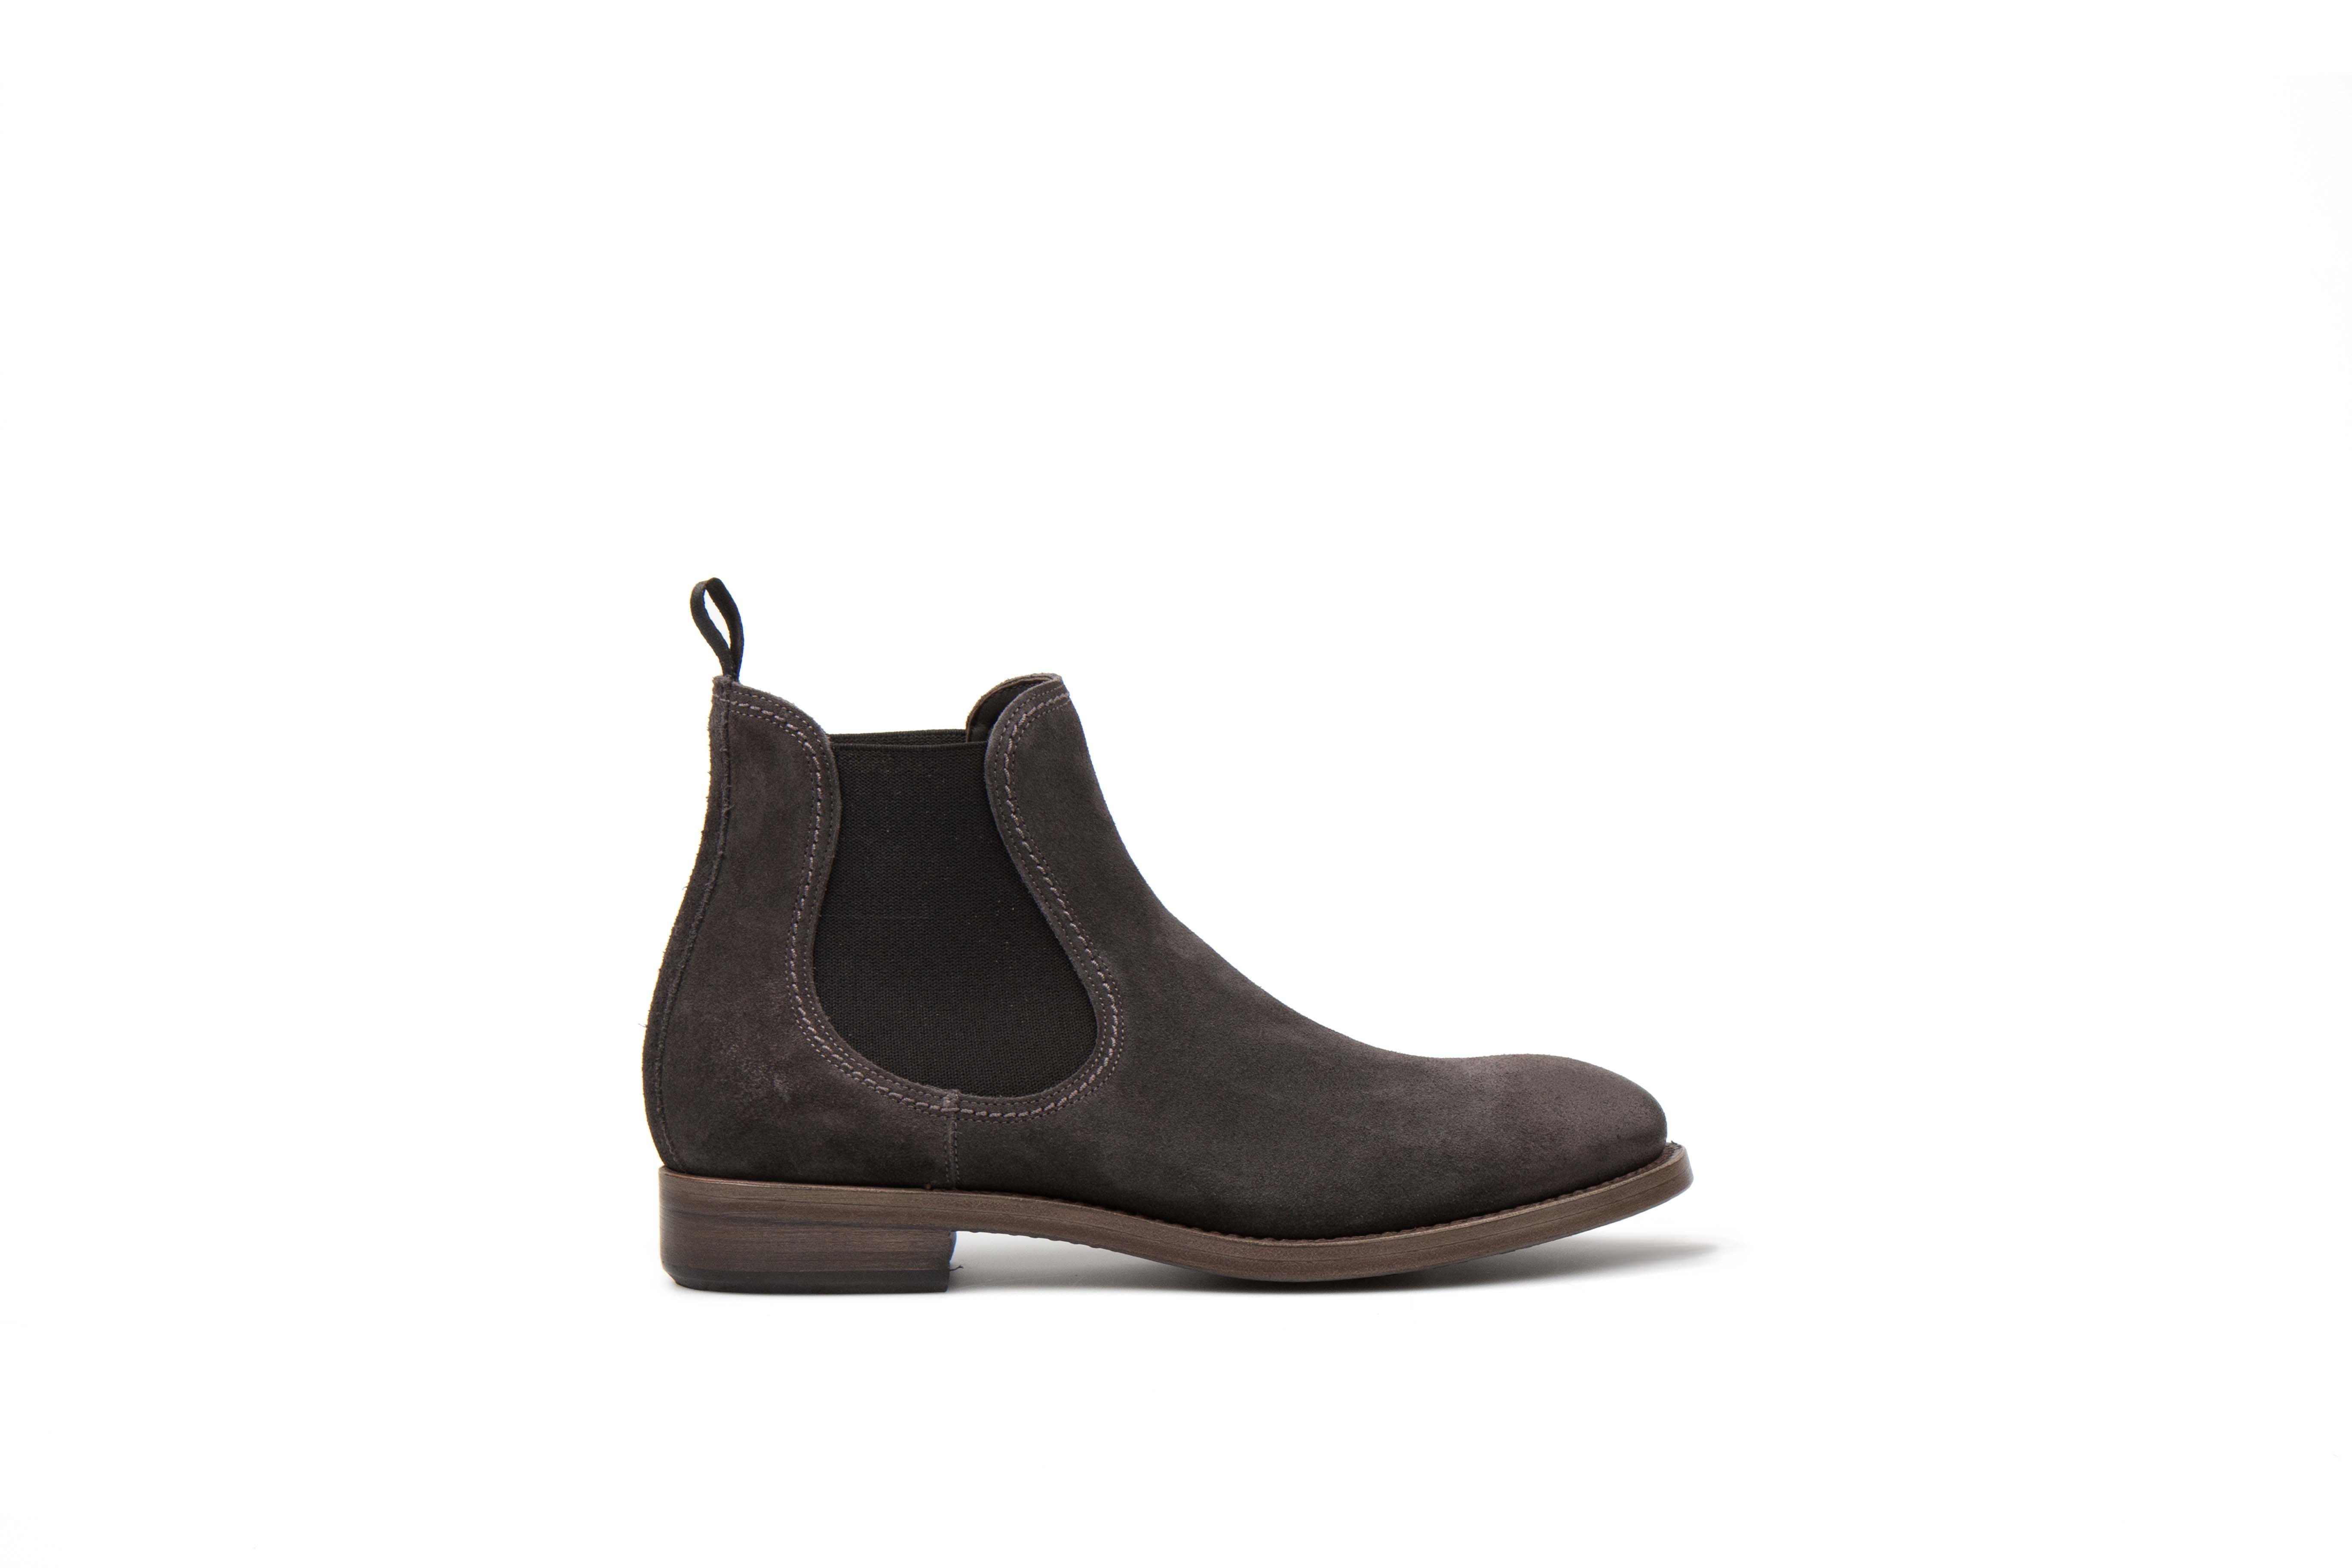 Hanoi Antracite Suede Leather Chelsea Boots – Project TWLV